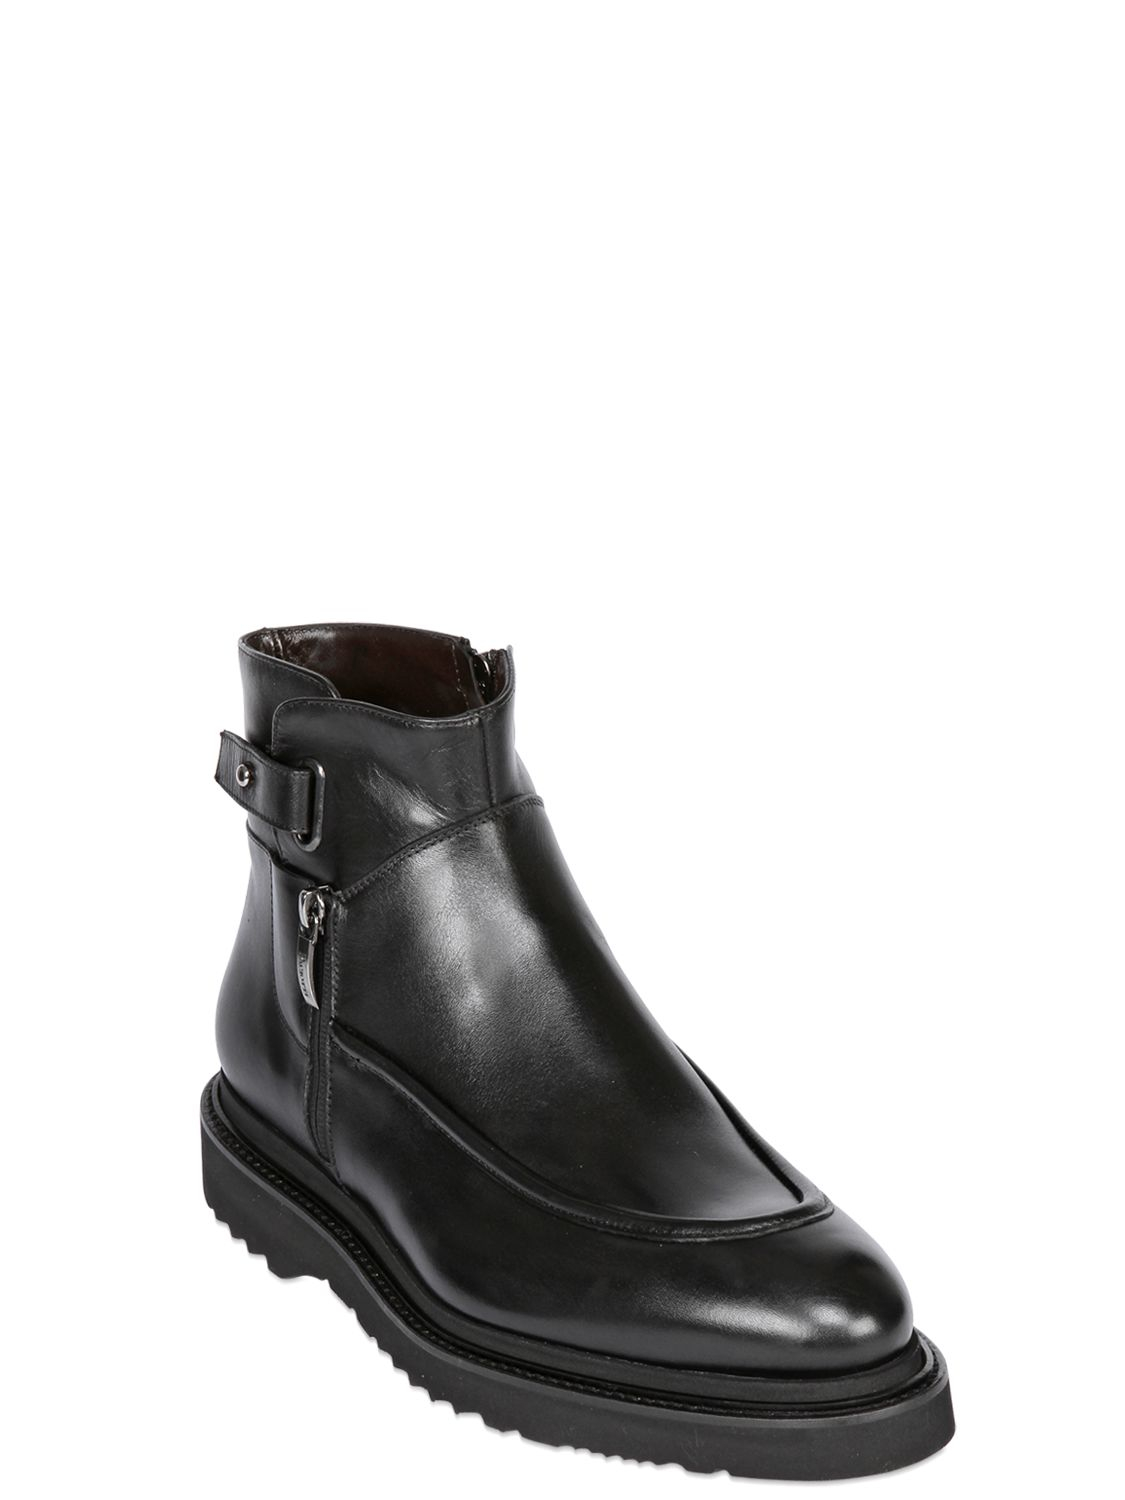 Lyst - Cesare paciotti Zipped Leather Boot in Black for Men